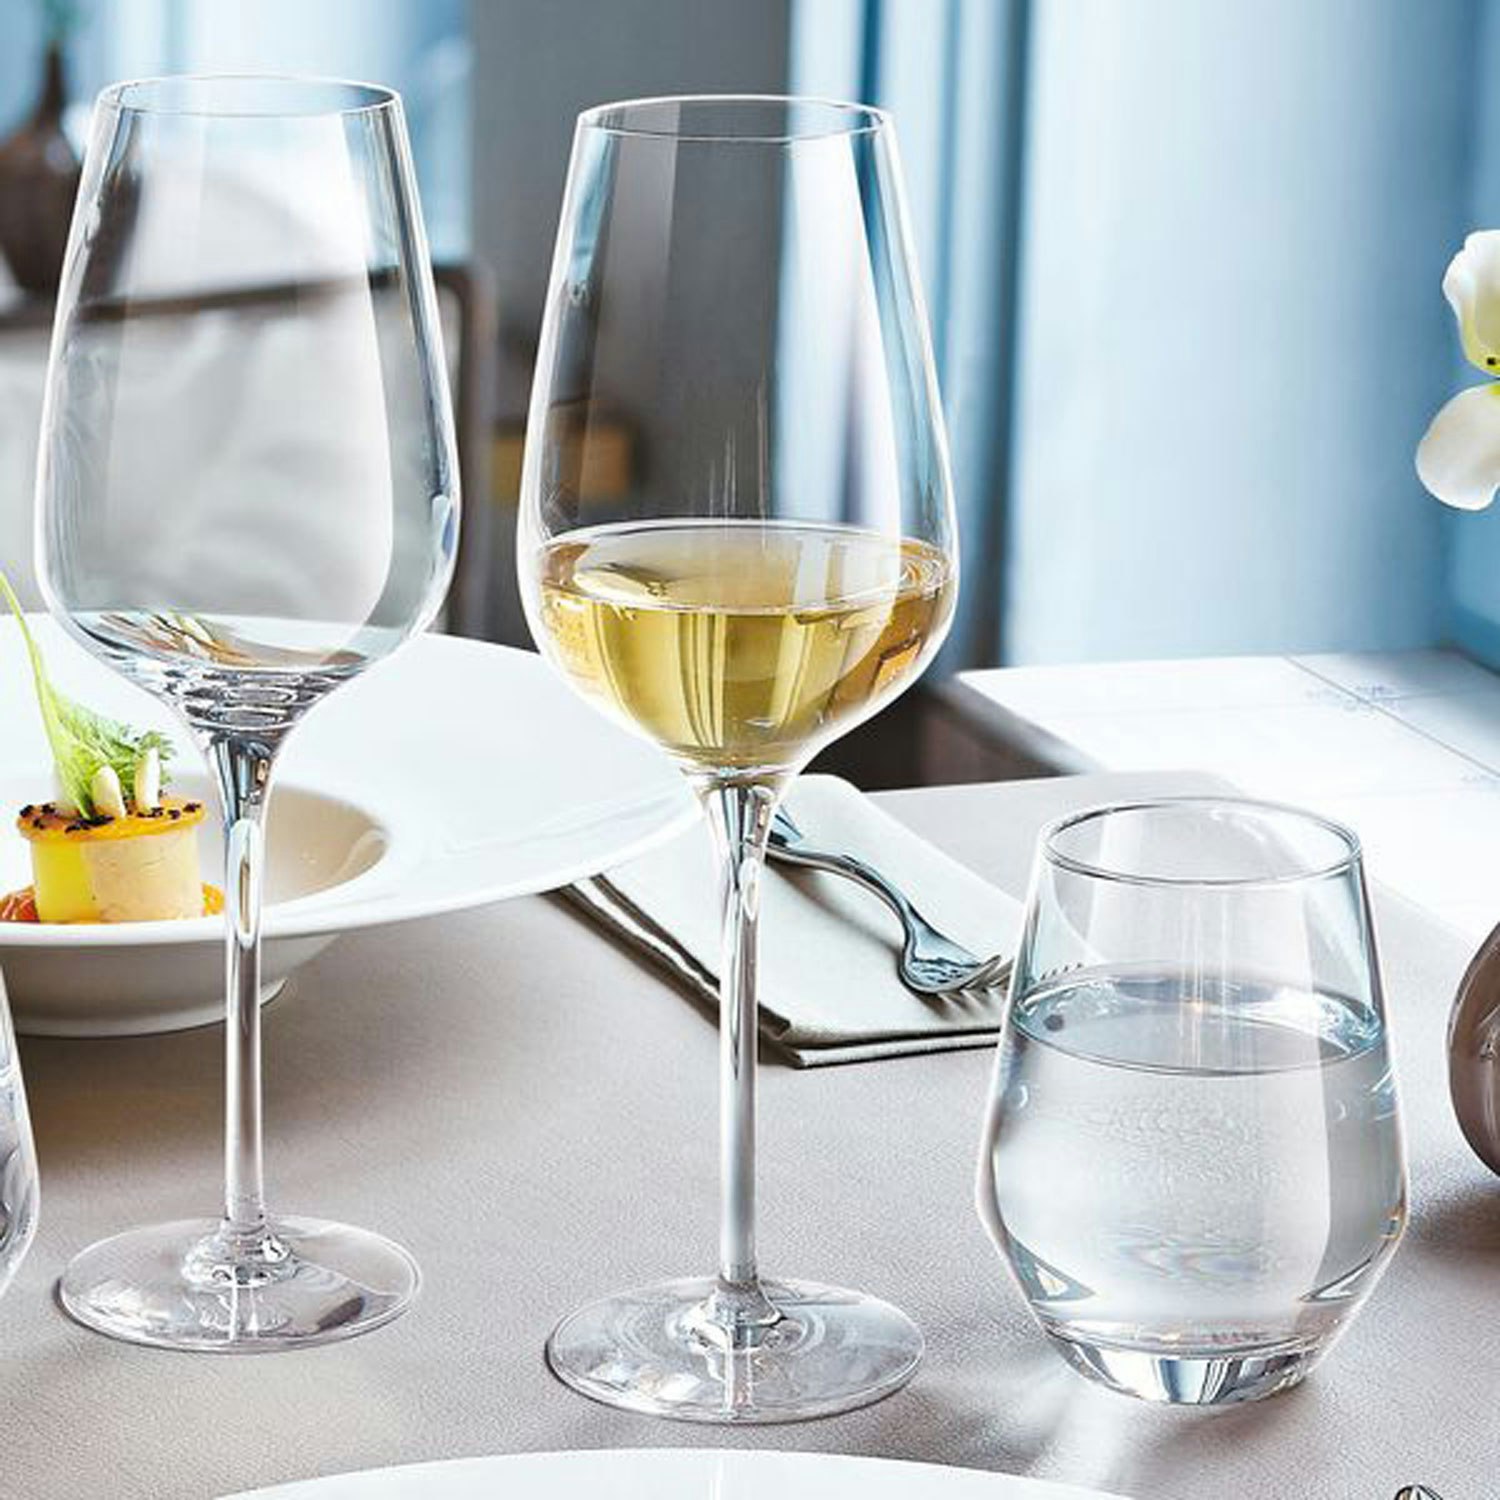 https://royaldesign.com/image/2/chefsommelier-sublym-white-wine-glass-25-cl-6-pack-1